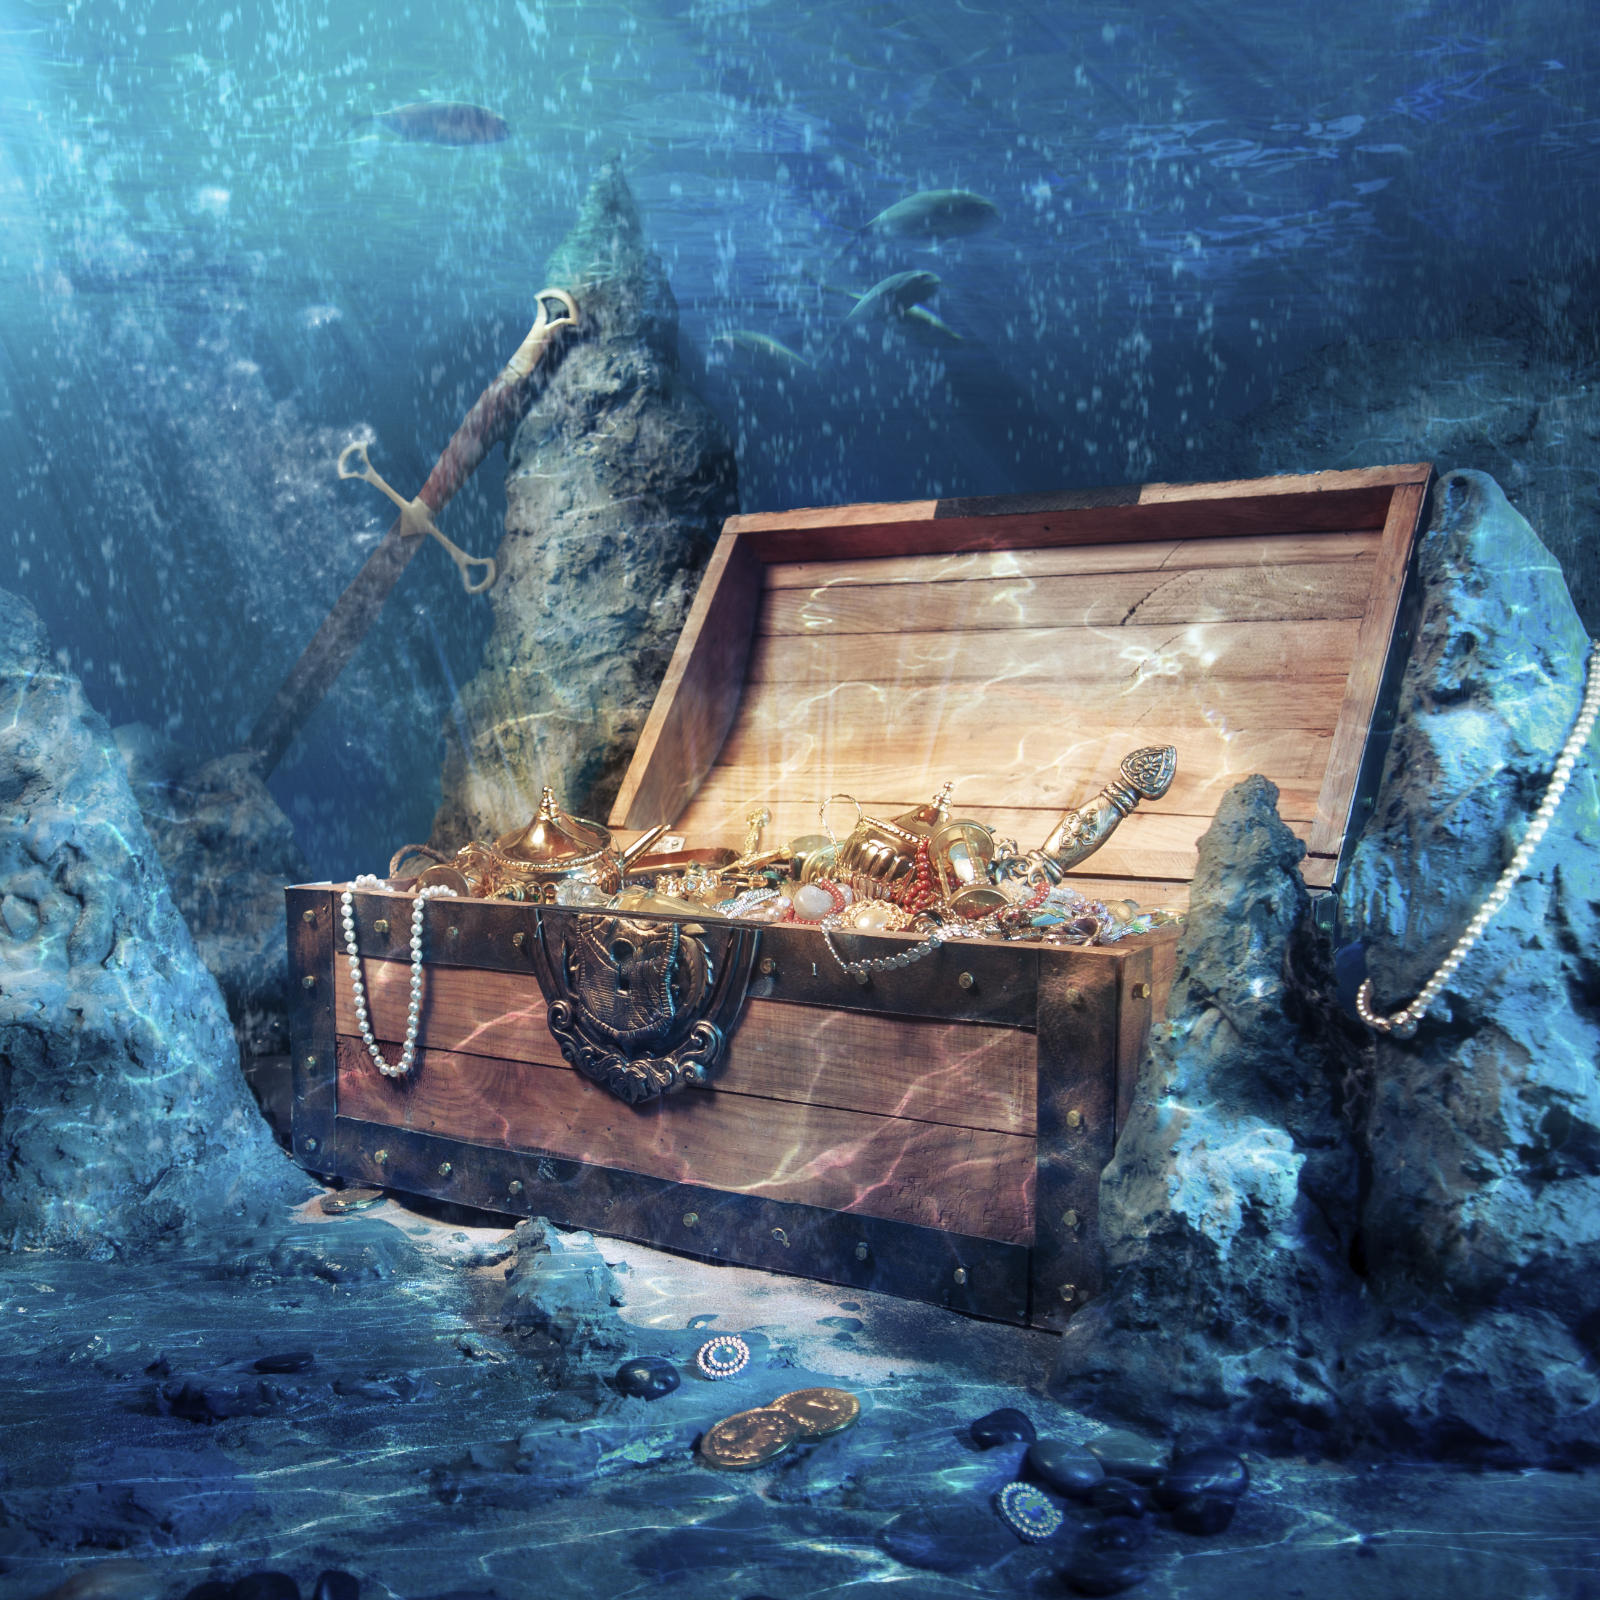 Russian Shipwreck and 'Treasure' Linked to Crypto Exchange